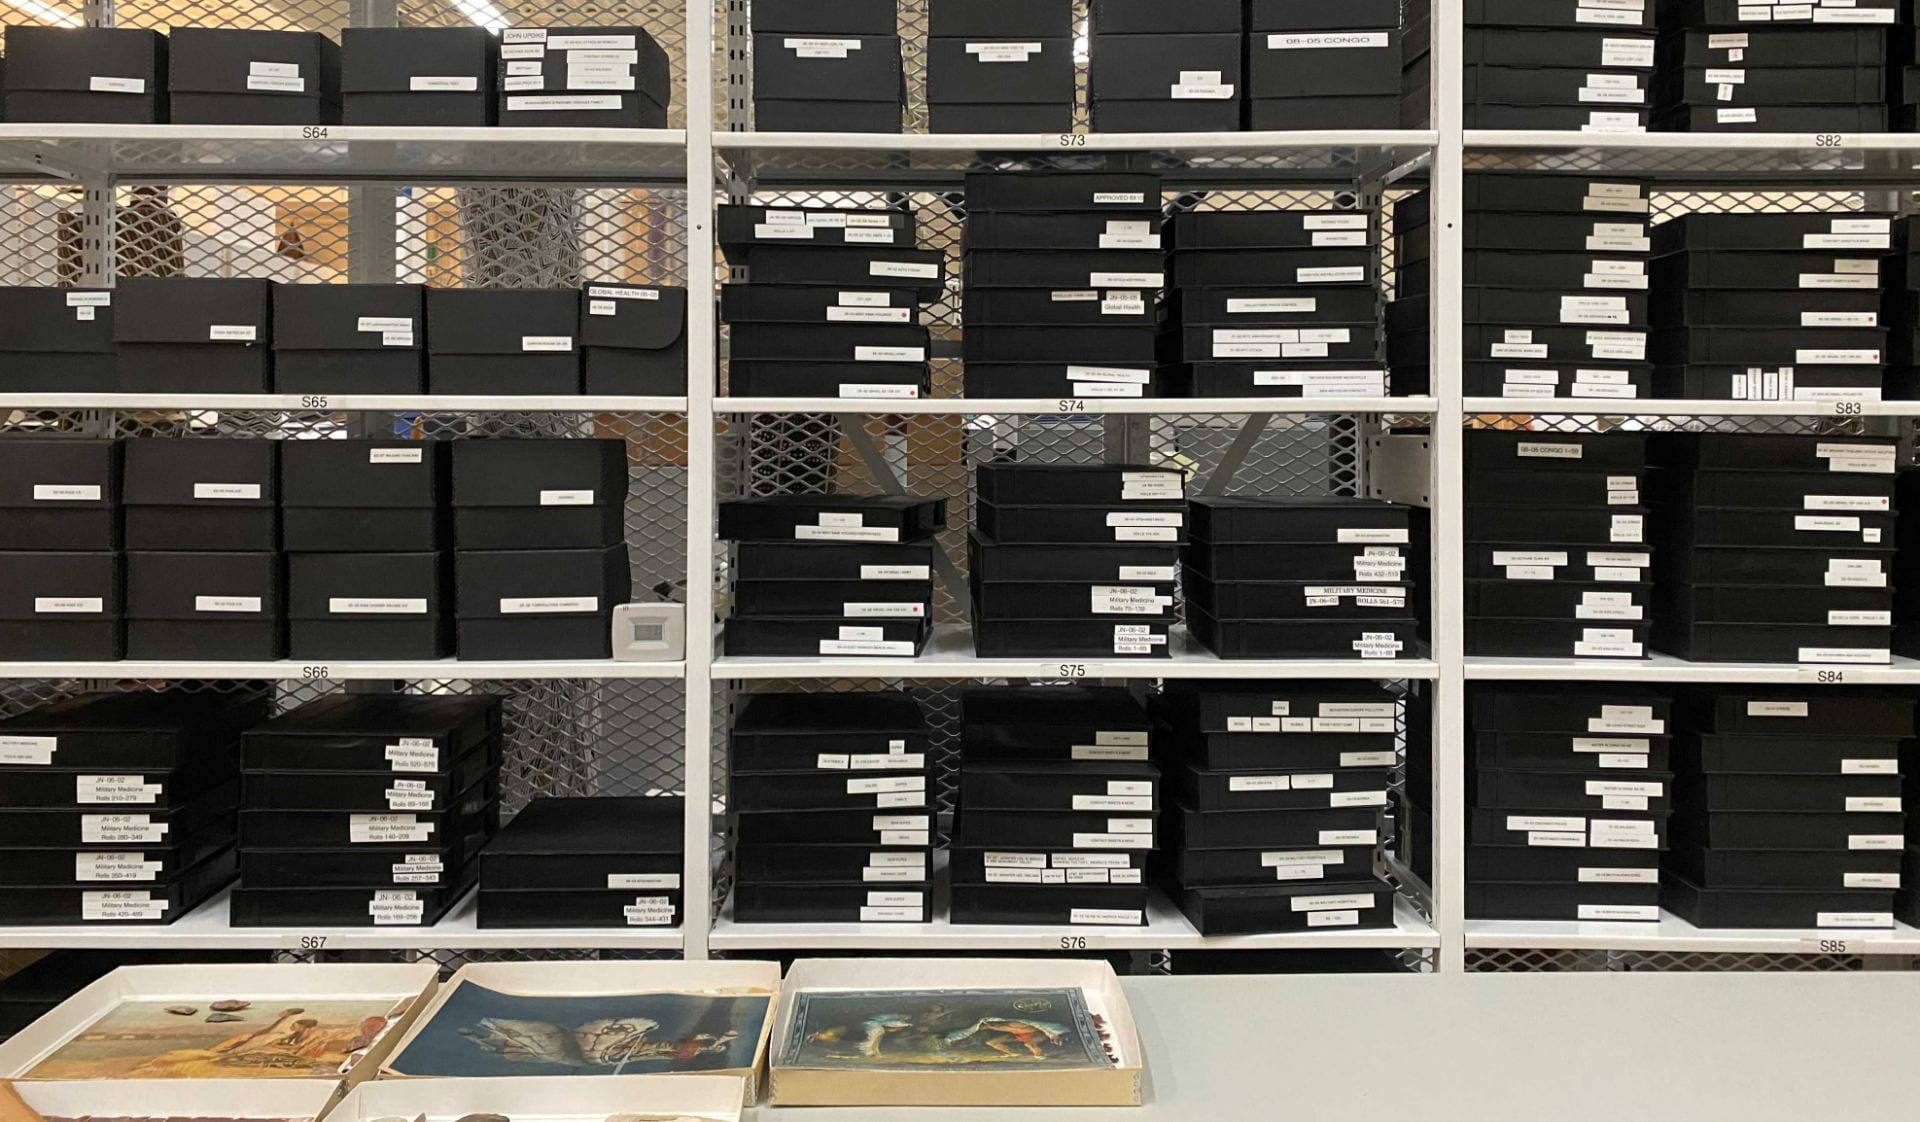 A look inside the Hood Museum of Art's archives.